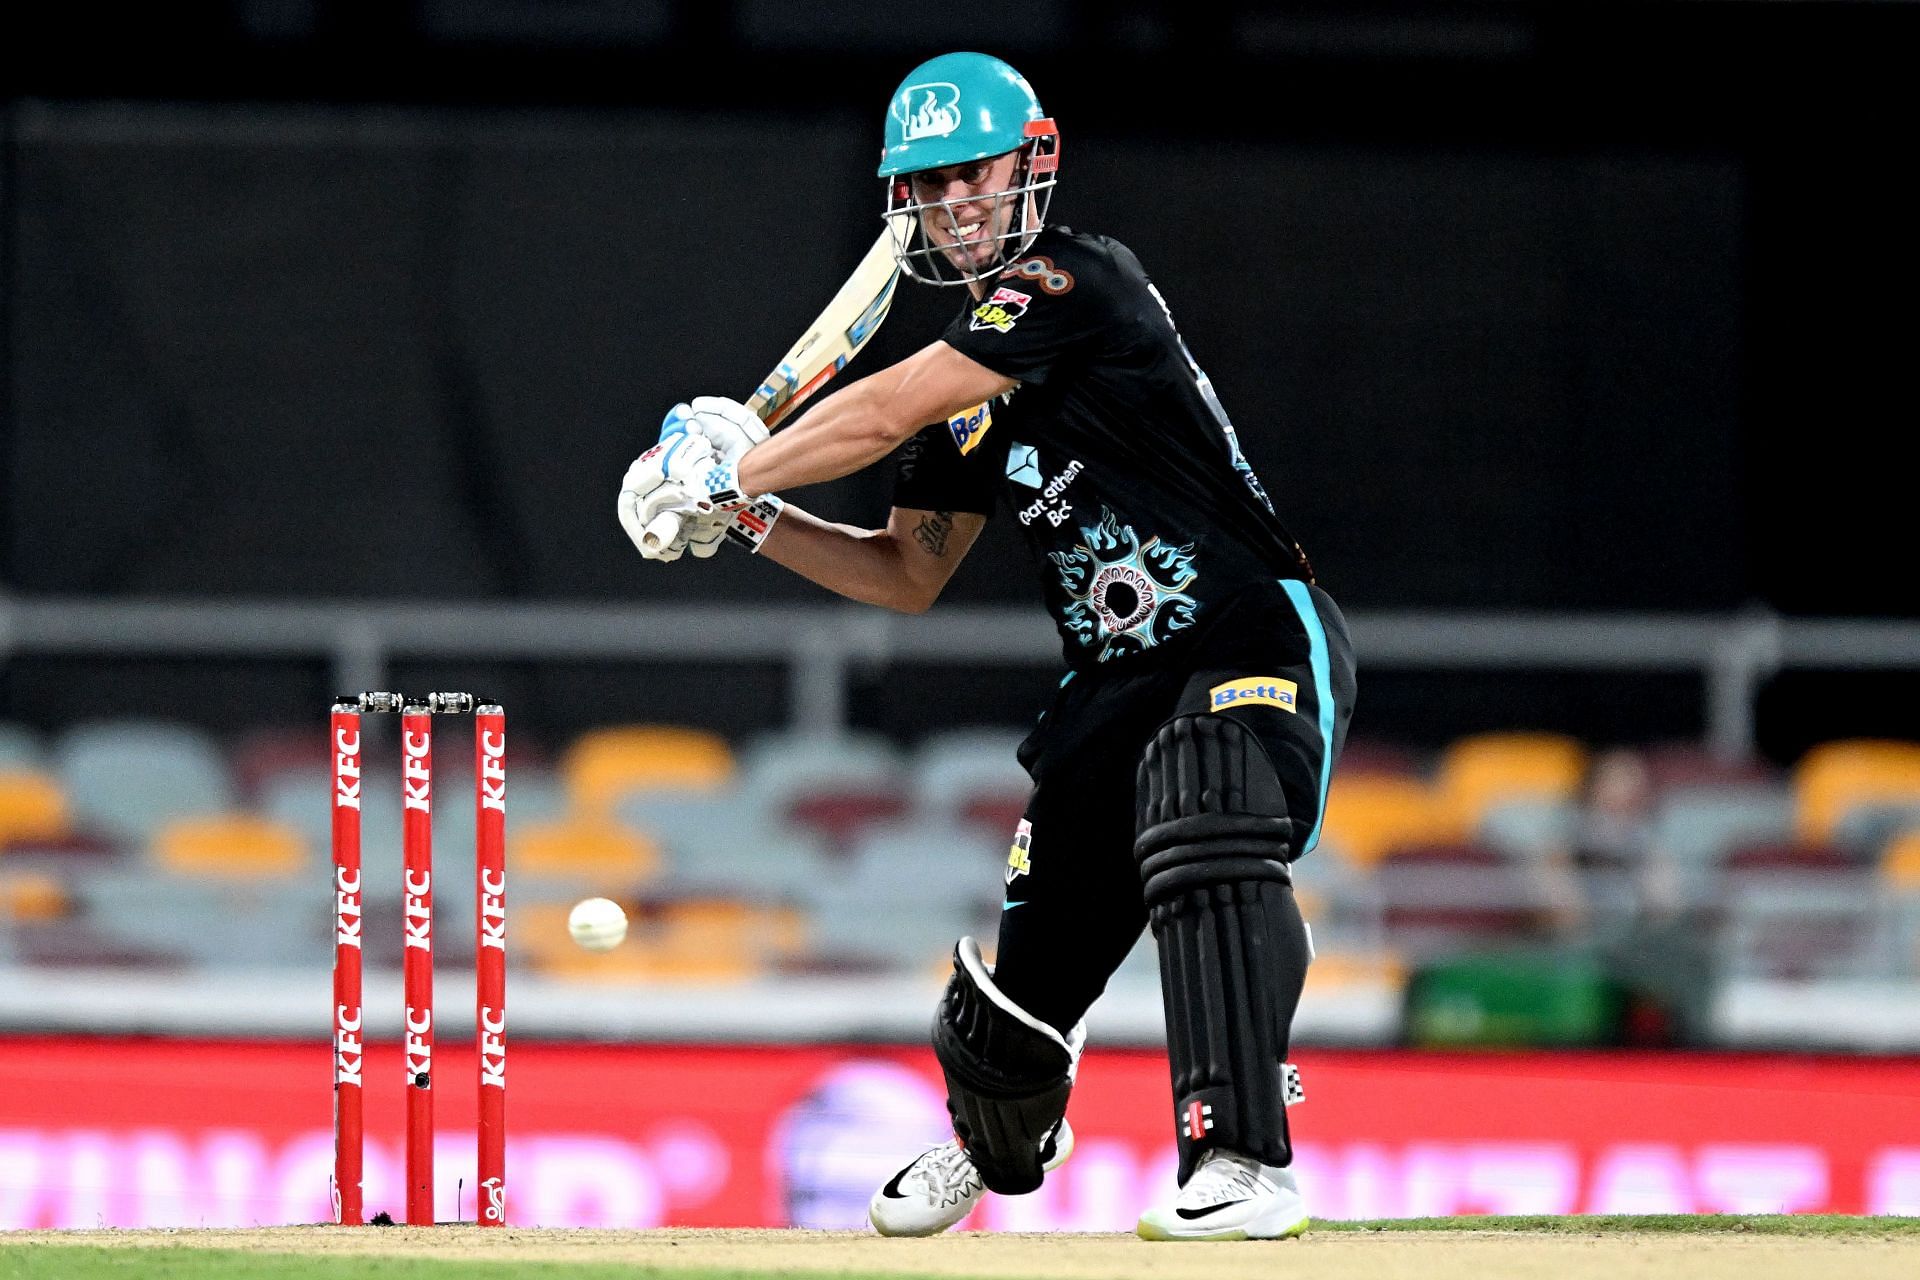 Chris Lynn is one of the top hard-hitters in the T20 world